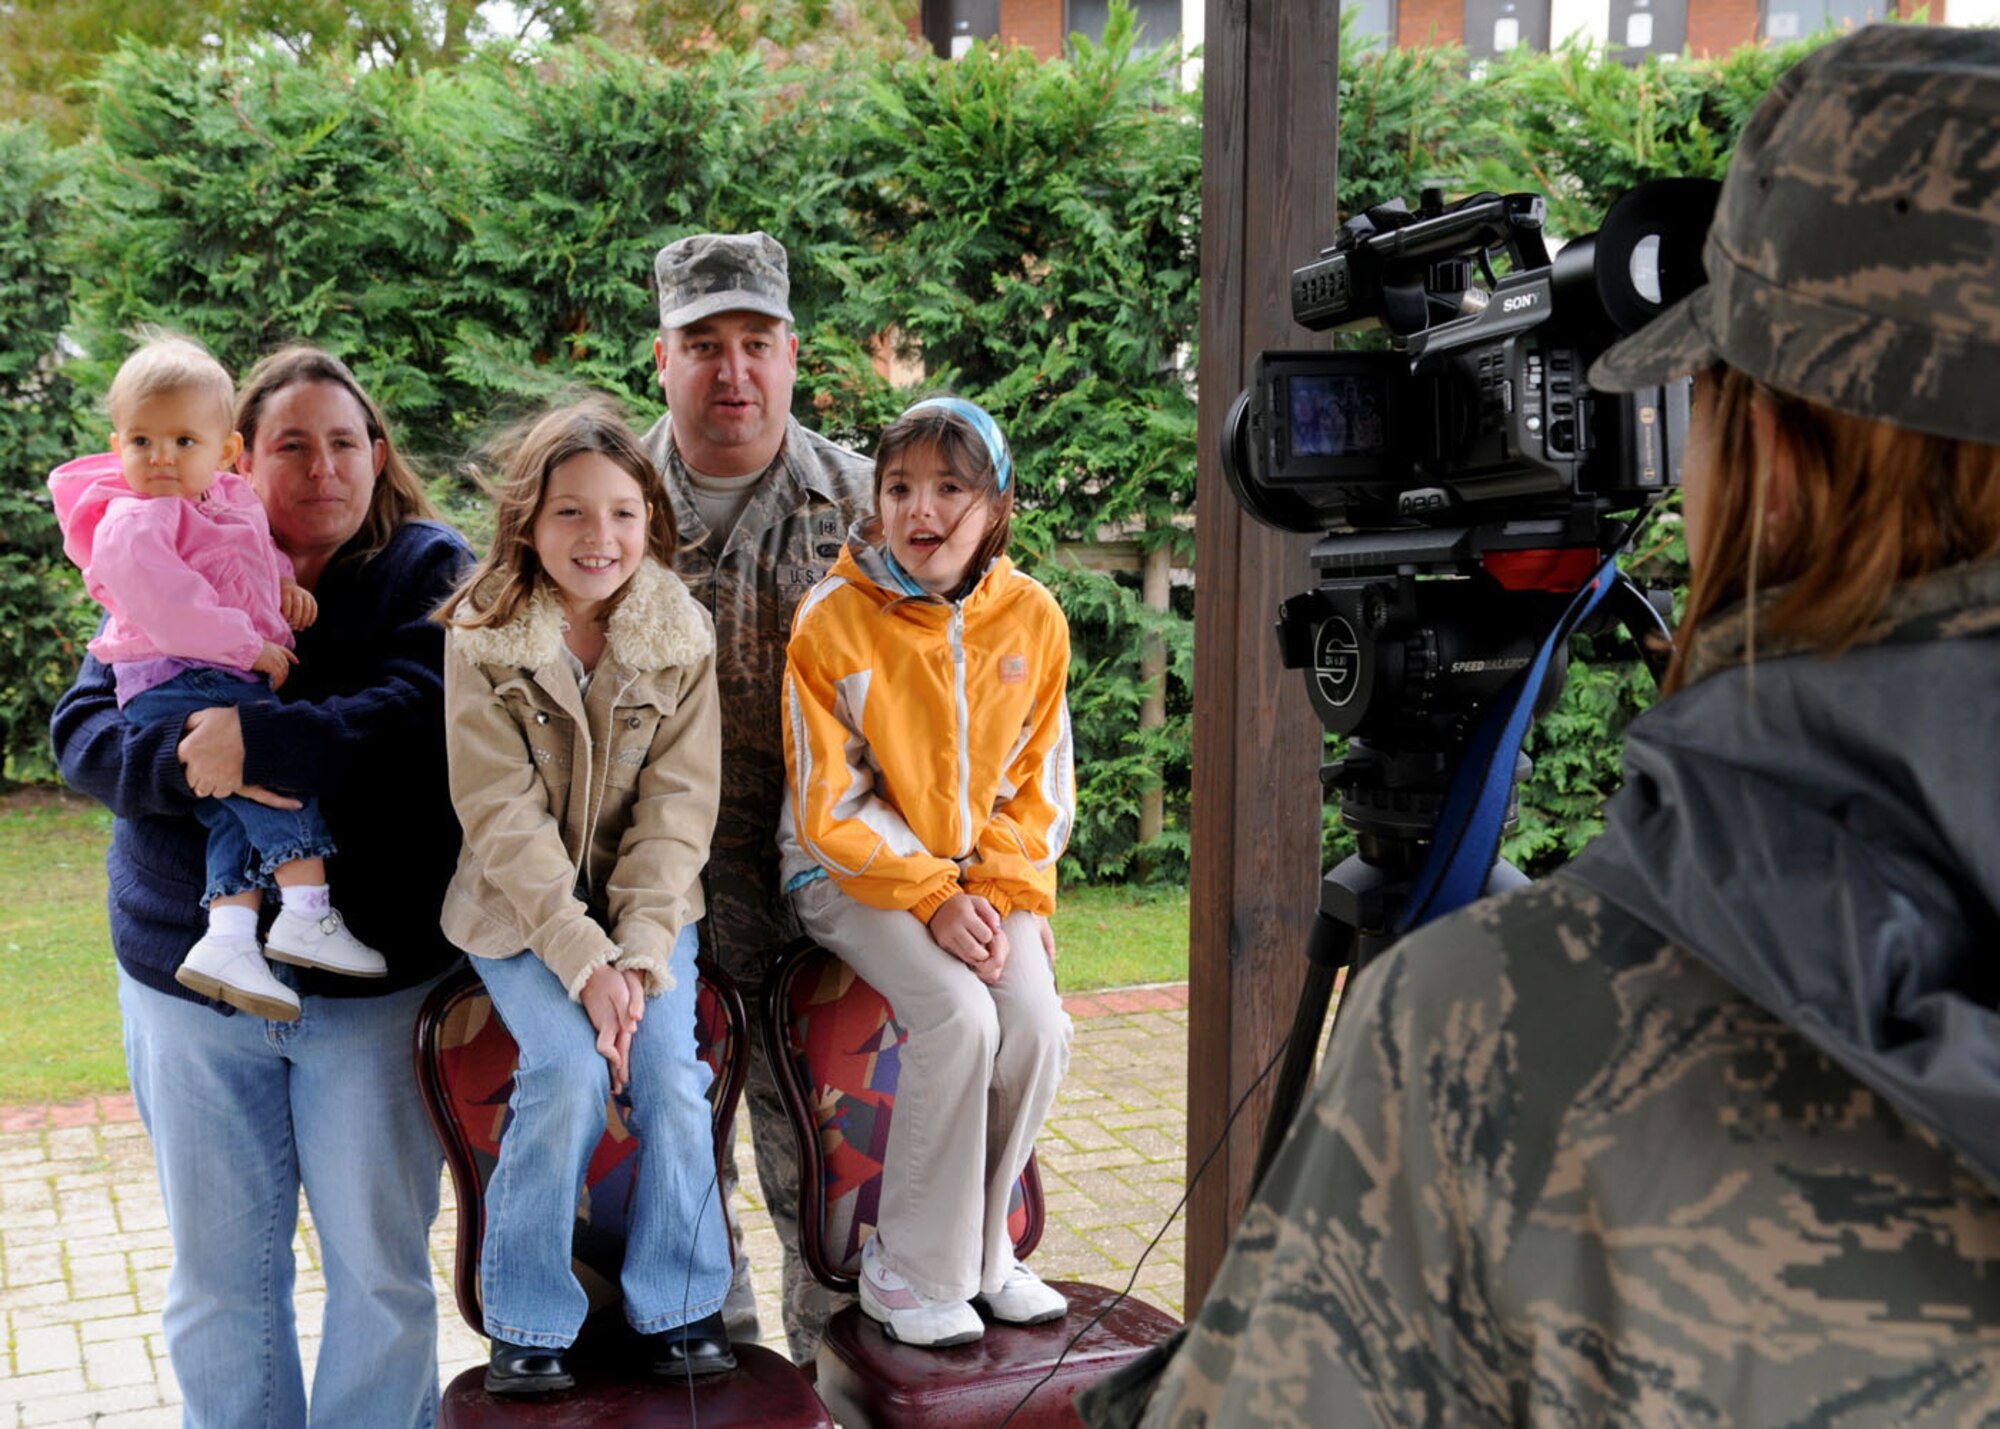 Staff Sgt. Alana Ingram, Air Force News, videos the Sharp family for the “Hometown Holiday Greetings” program Oct. 3, 2008, at RAF Mildenhall, England. While servicemembers and their families serve their tours overseas, AFNews records and sends taped messages for broadcast on local television stations for families in the states to see during the holiday season. (U.S. Air Force photo by Staff Sgt. Jerry Fleshman)